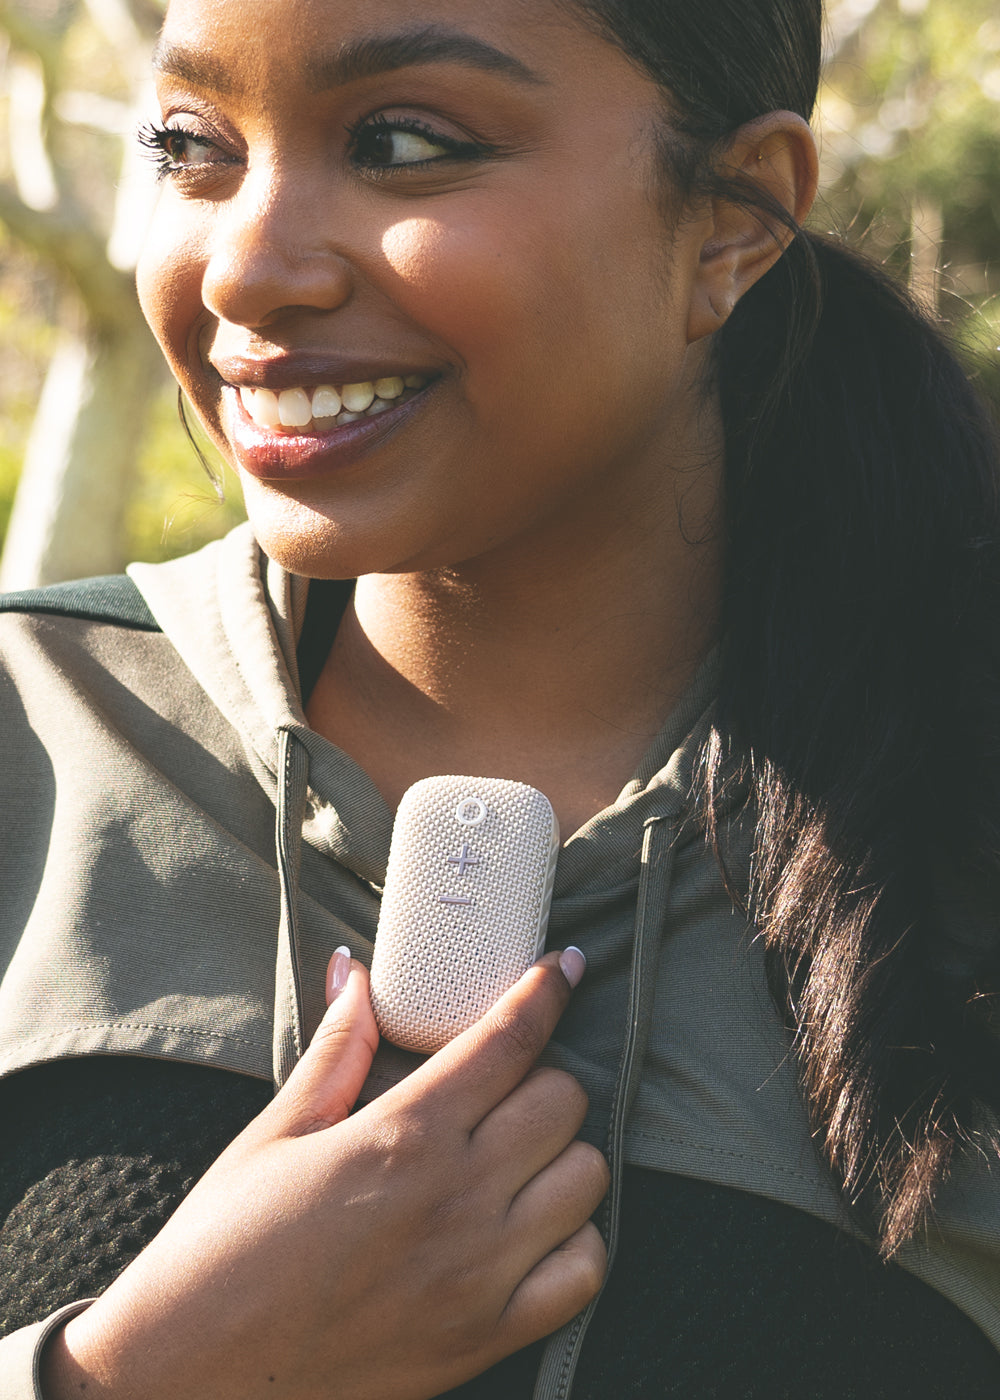 A smiling woman holding a portable speaker in her hand while standing outdoors, sunlight filtering through trees in the background.